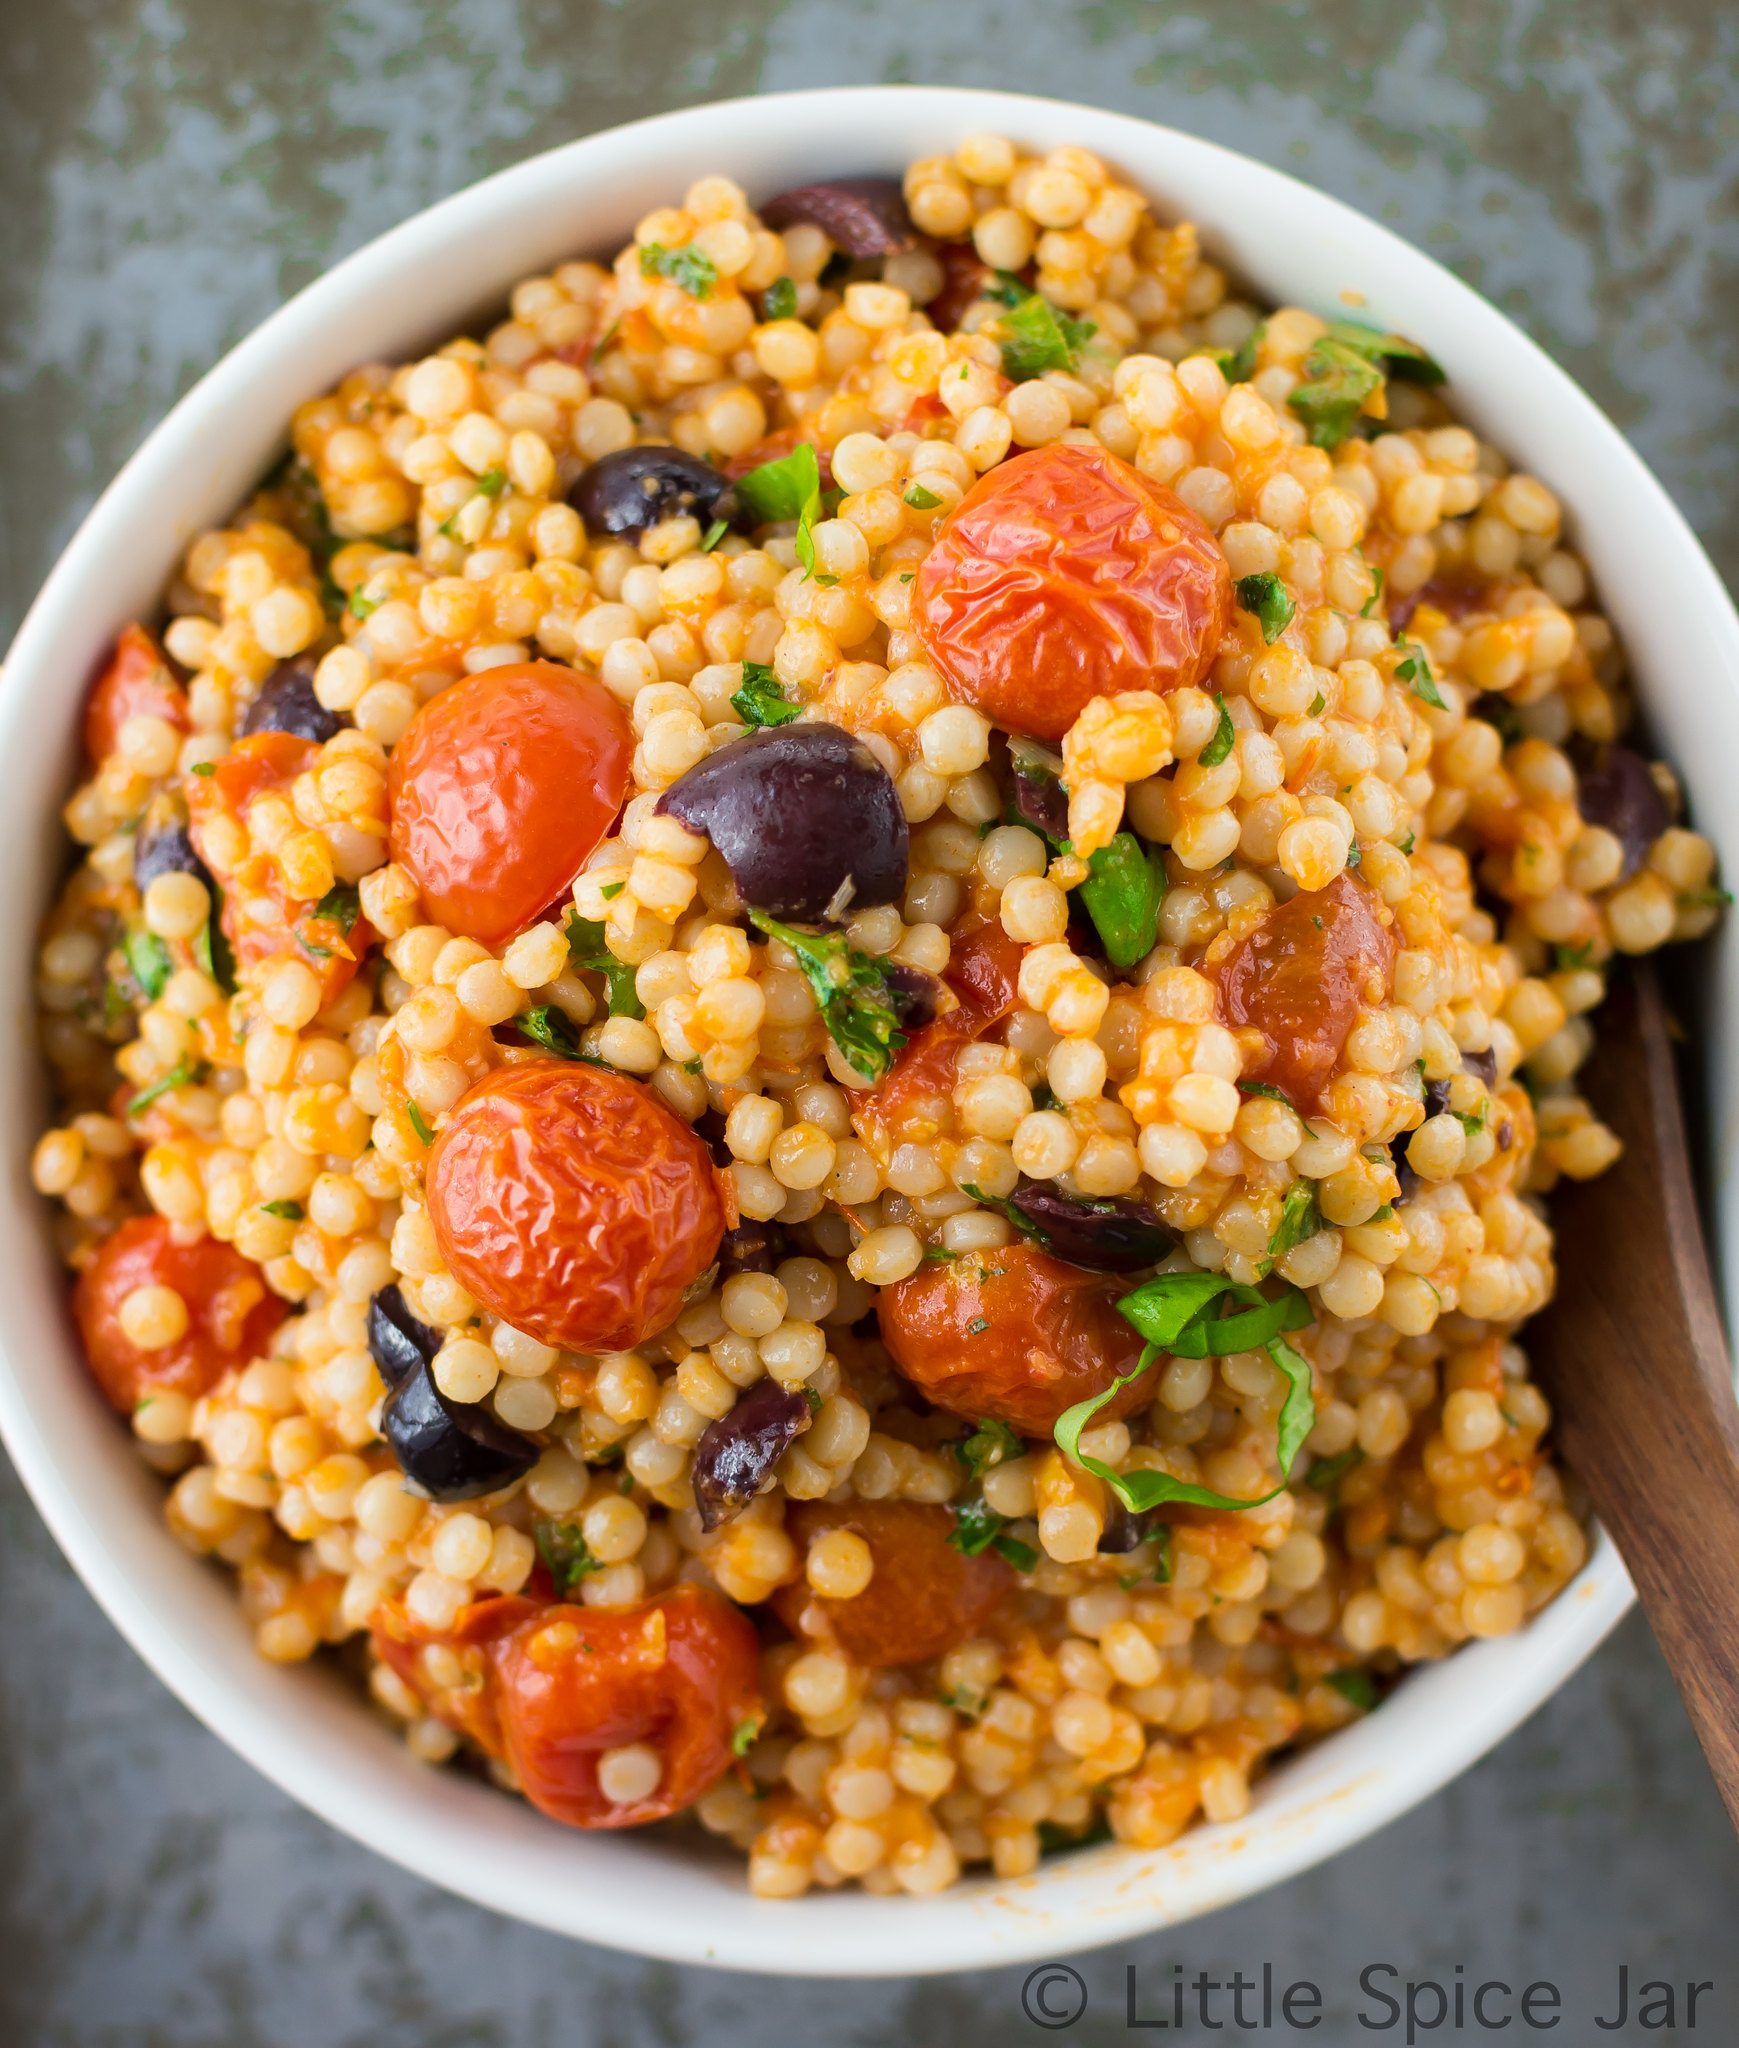 roasted vegetable pearl couscous salad in white bowl with wooden spoon